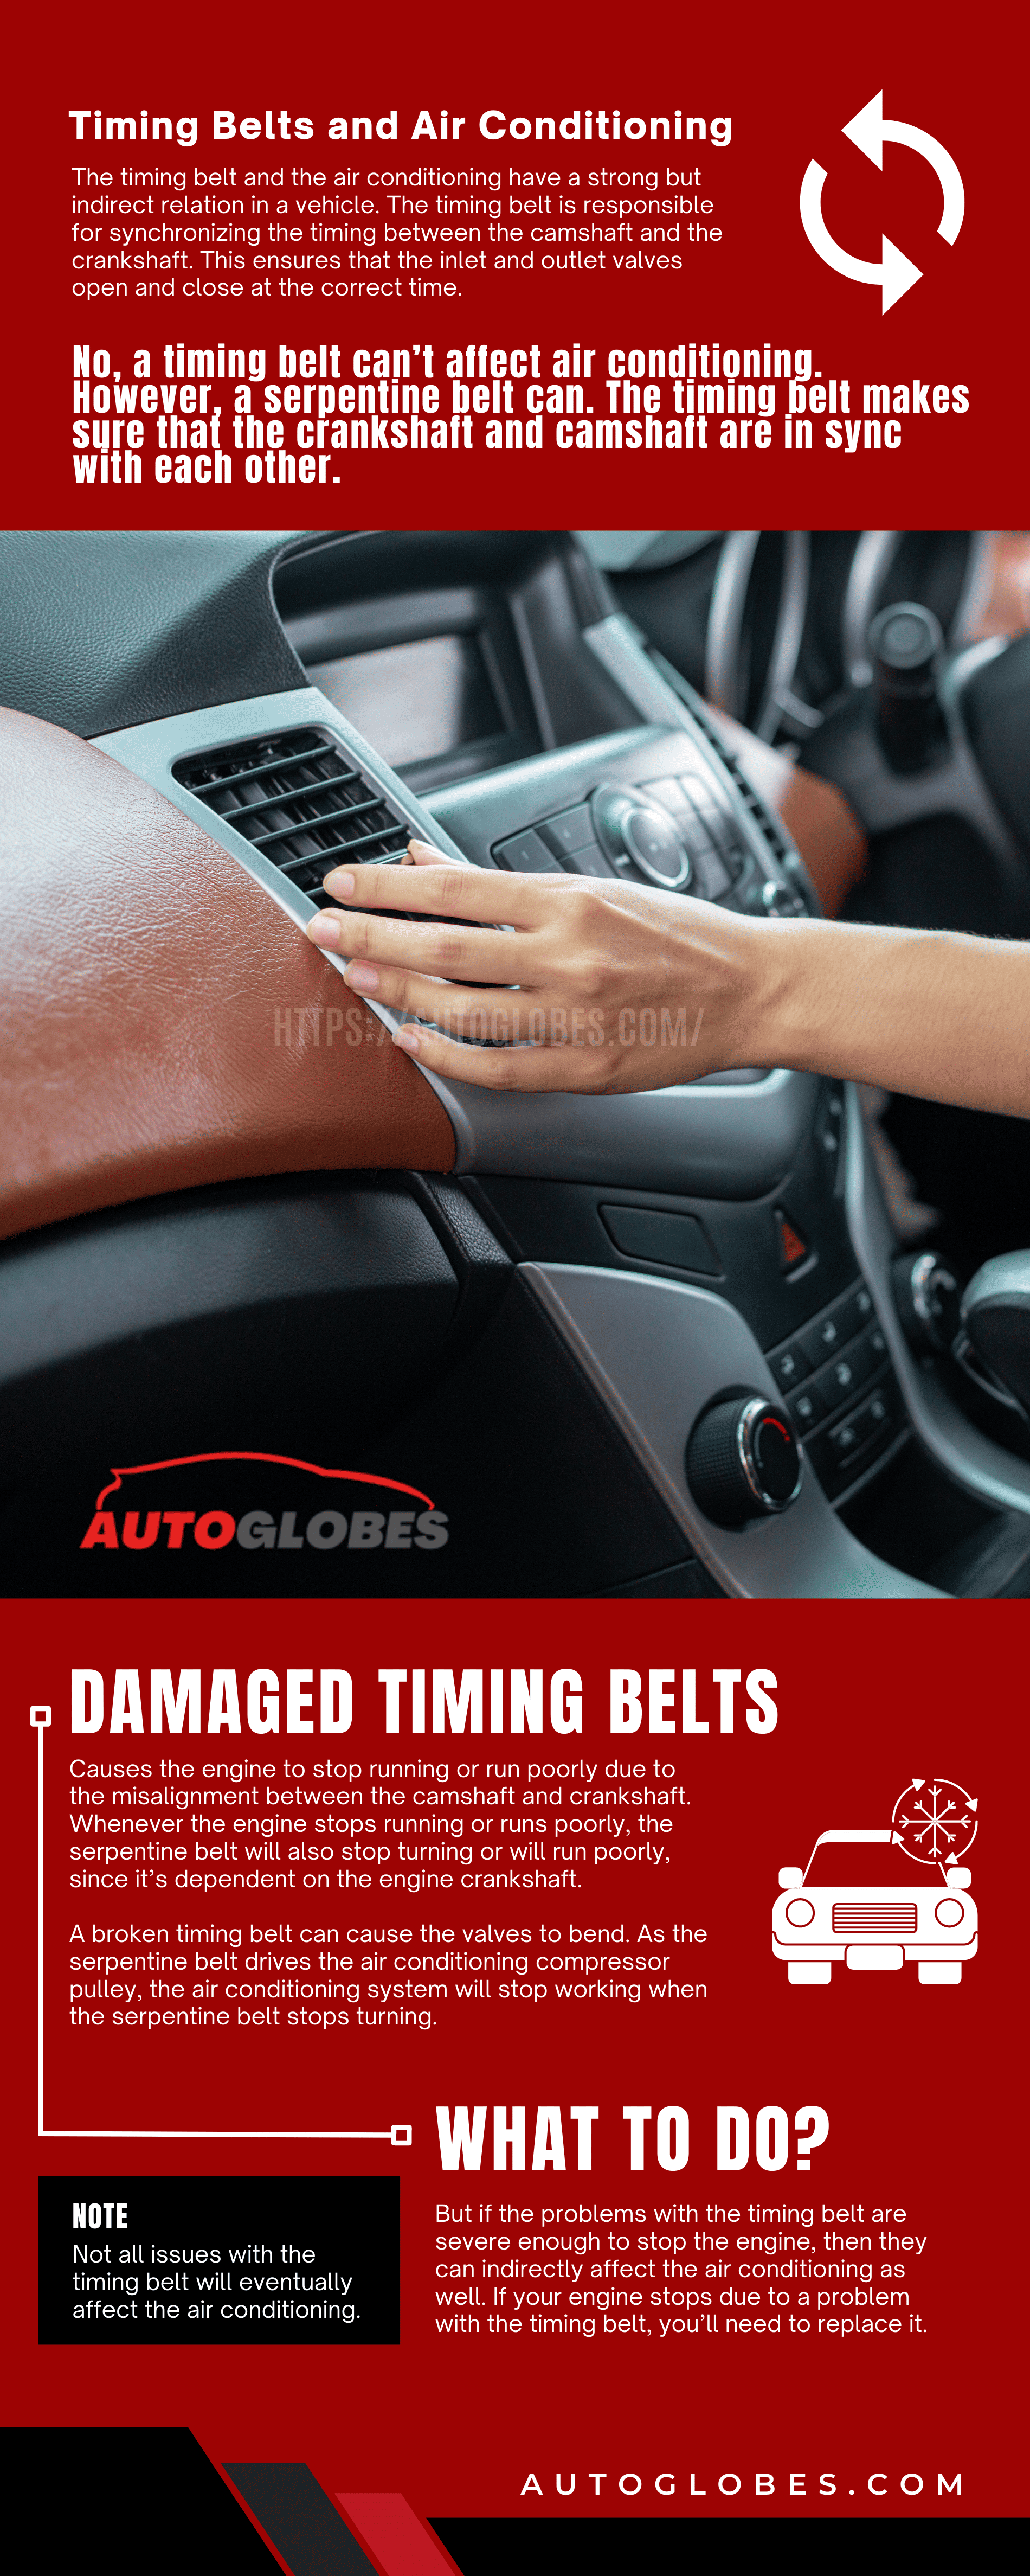 Timing Belts and Air Conditioning Infographic